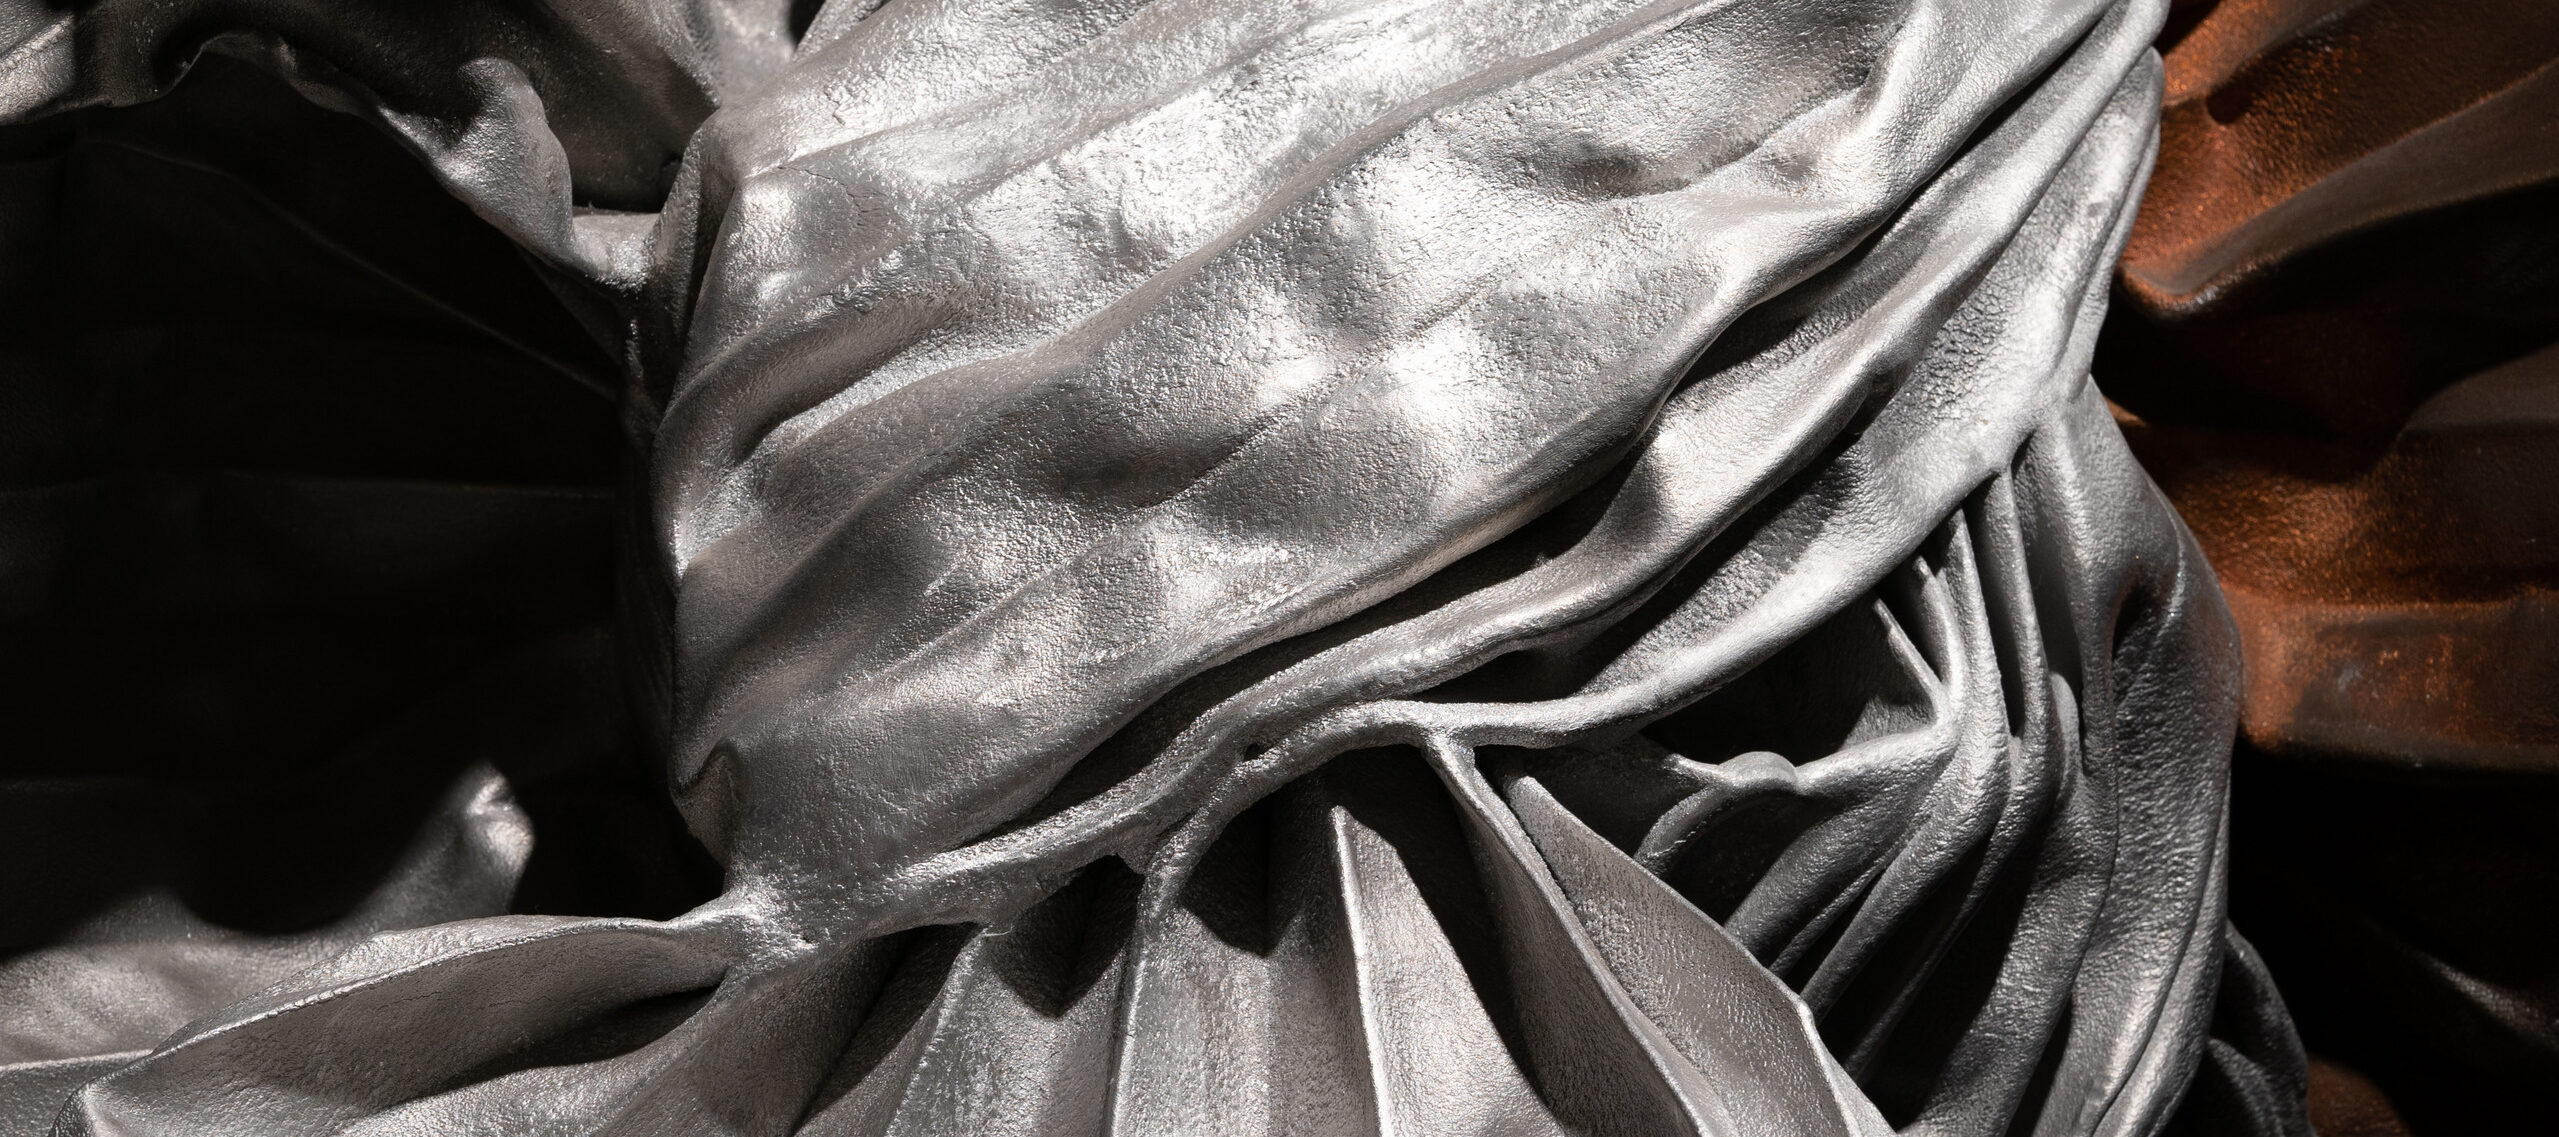 A close-up of a silver, metal sculpture that appears to be tied in a giant knot with crisp folds in the metal sheets.